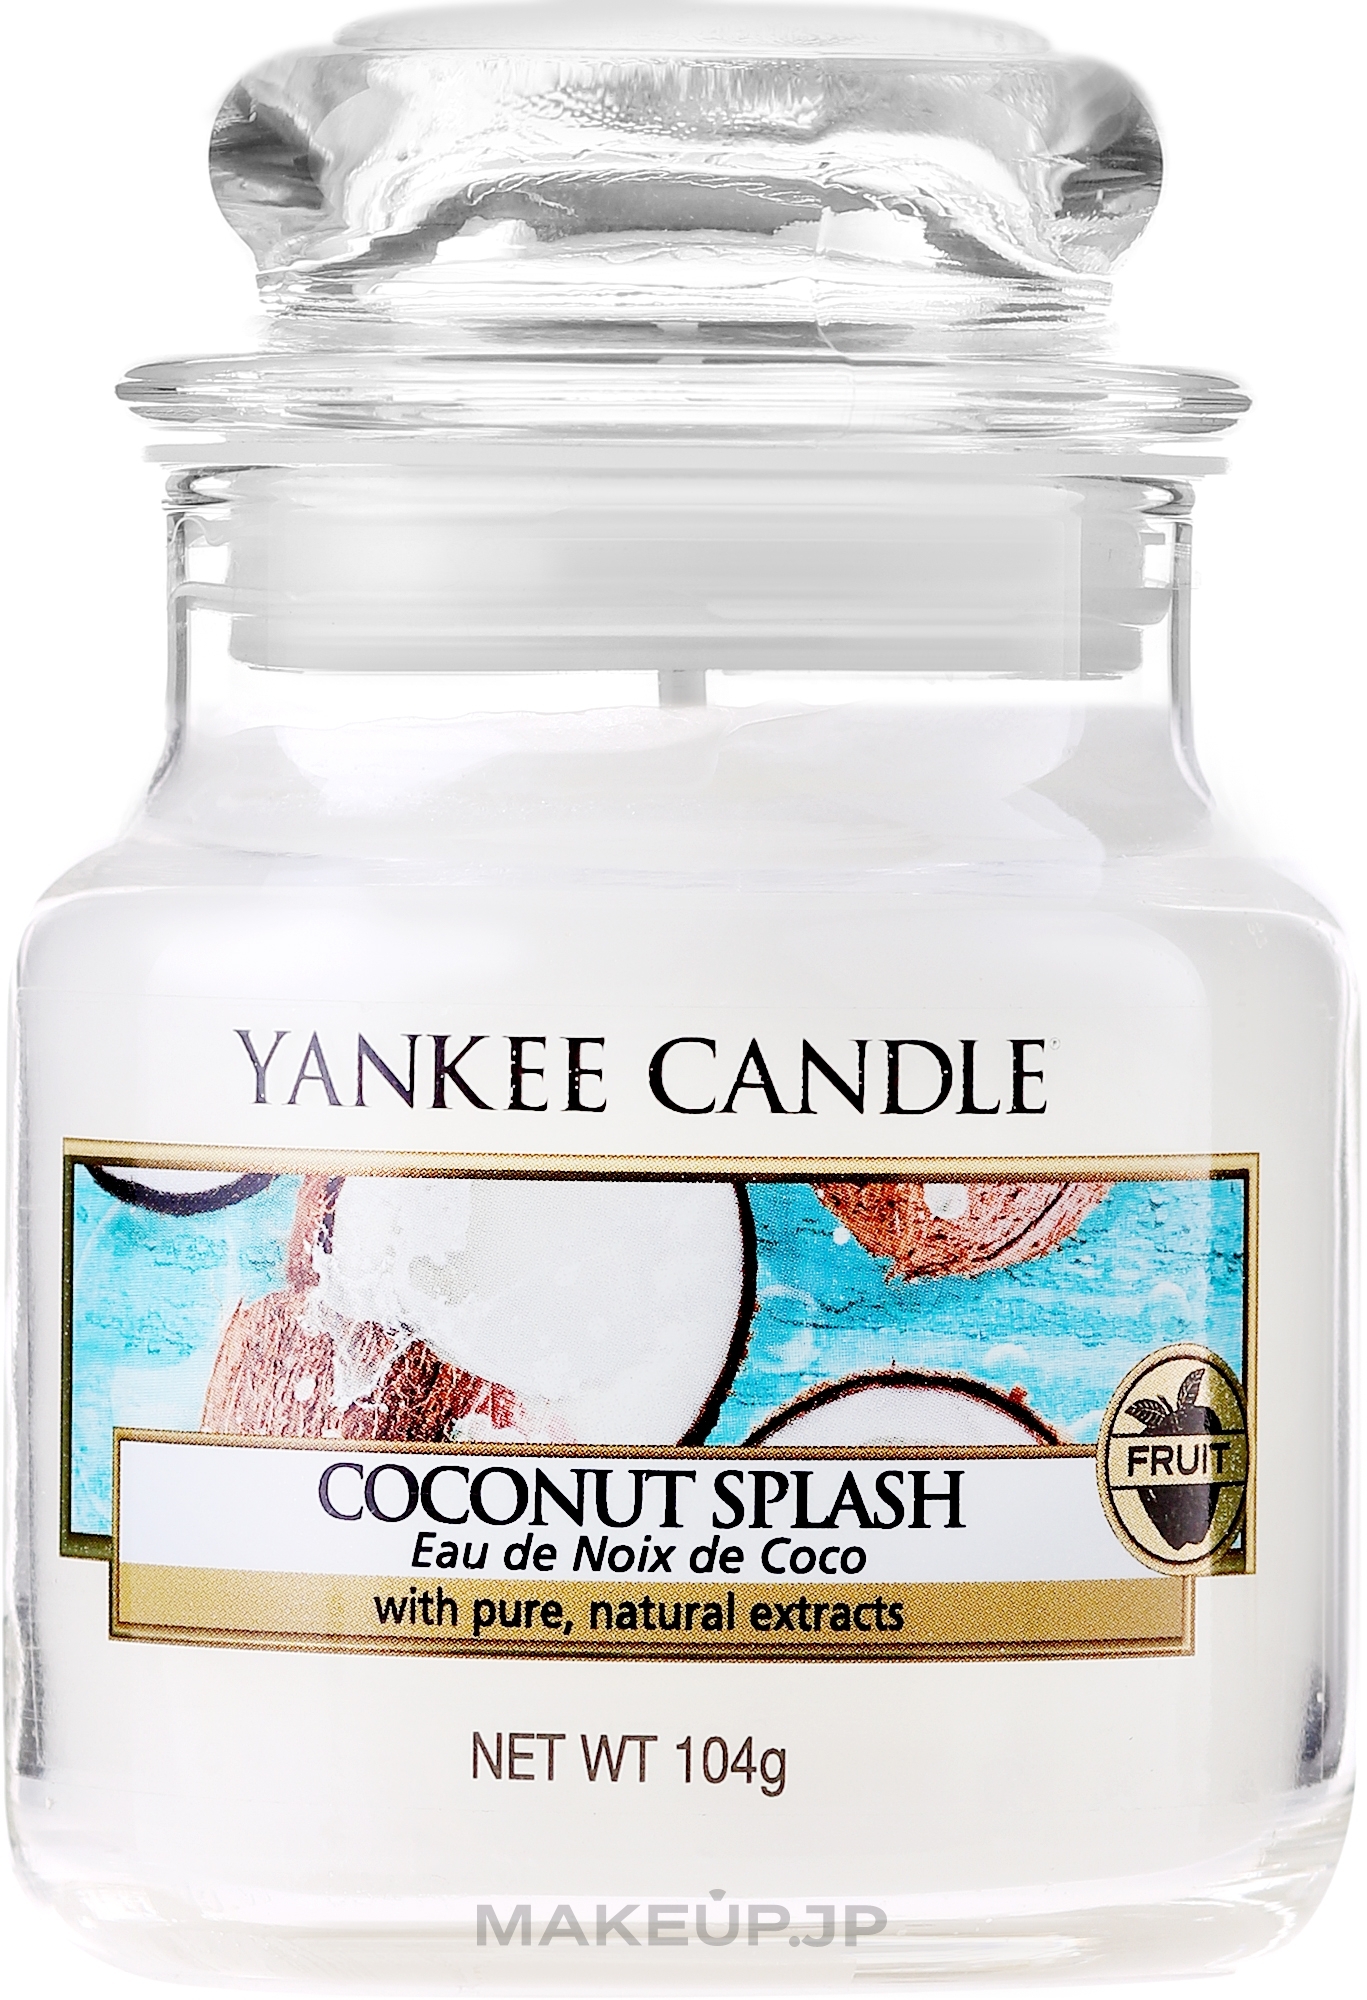 Scented Candle in Jar - Yankee Candle Coconut Splash — photo 104 g